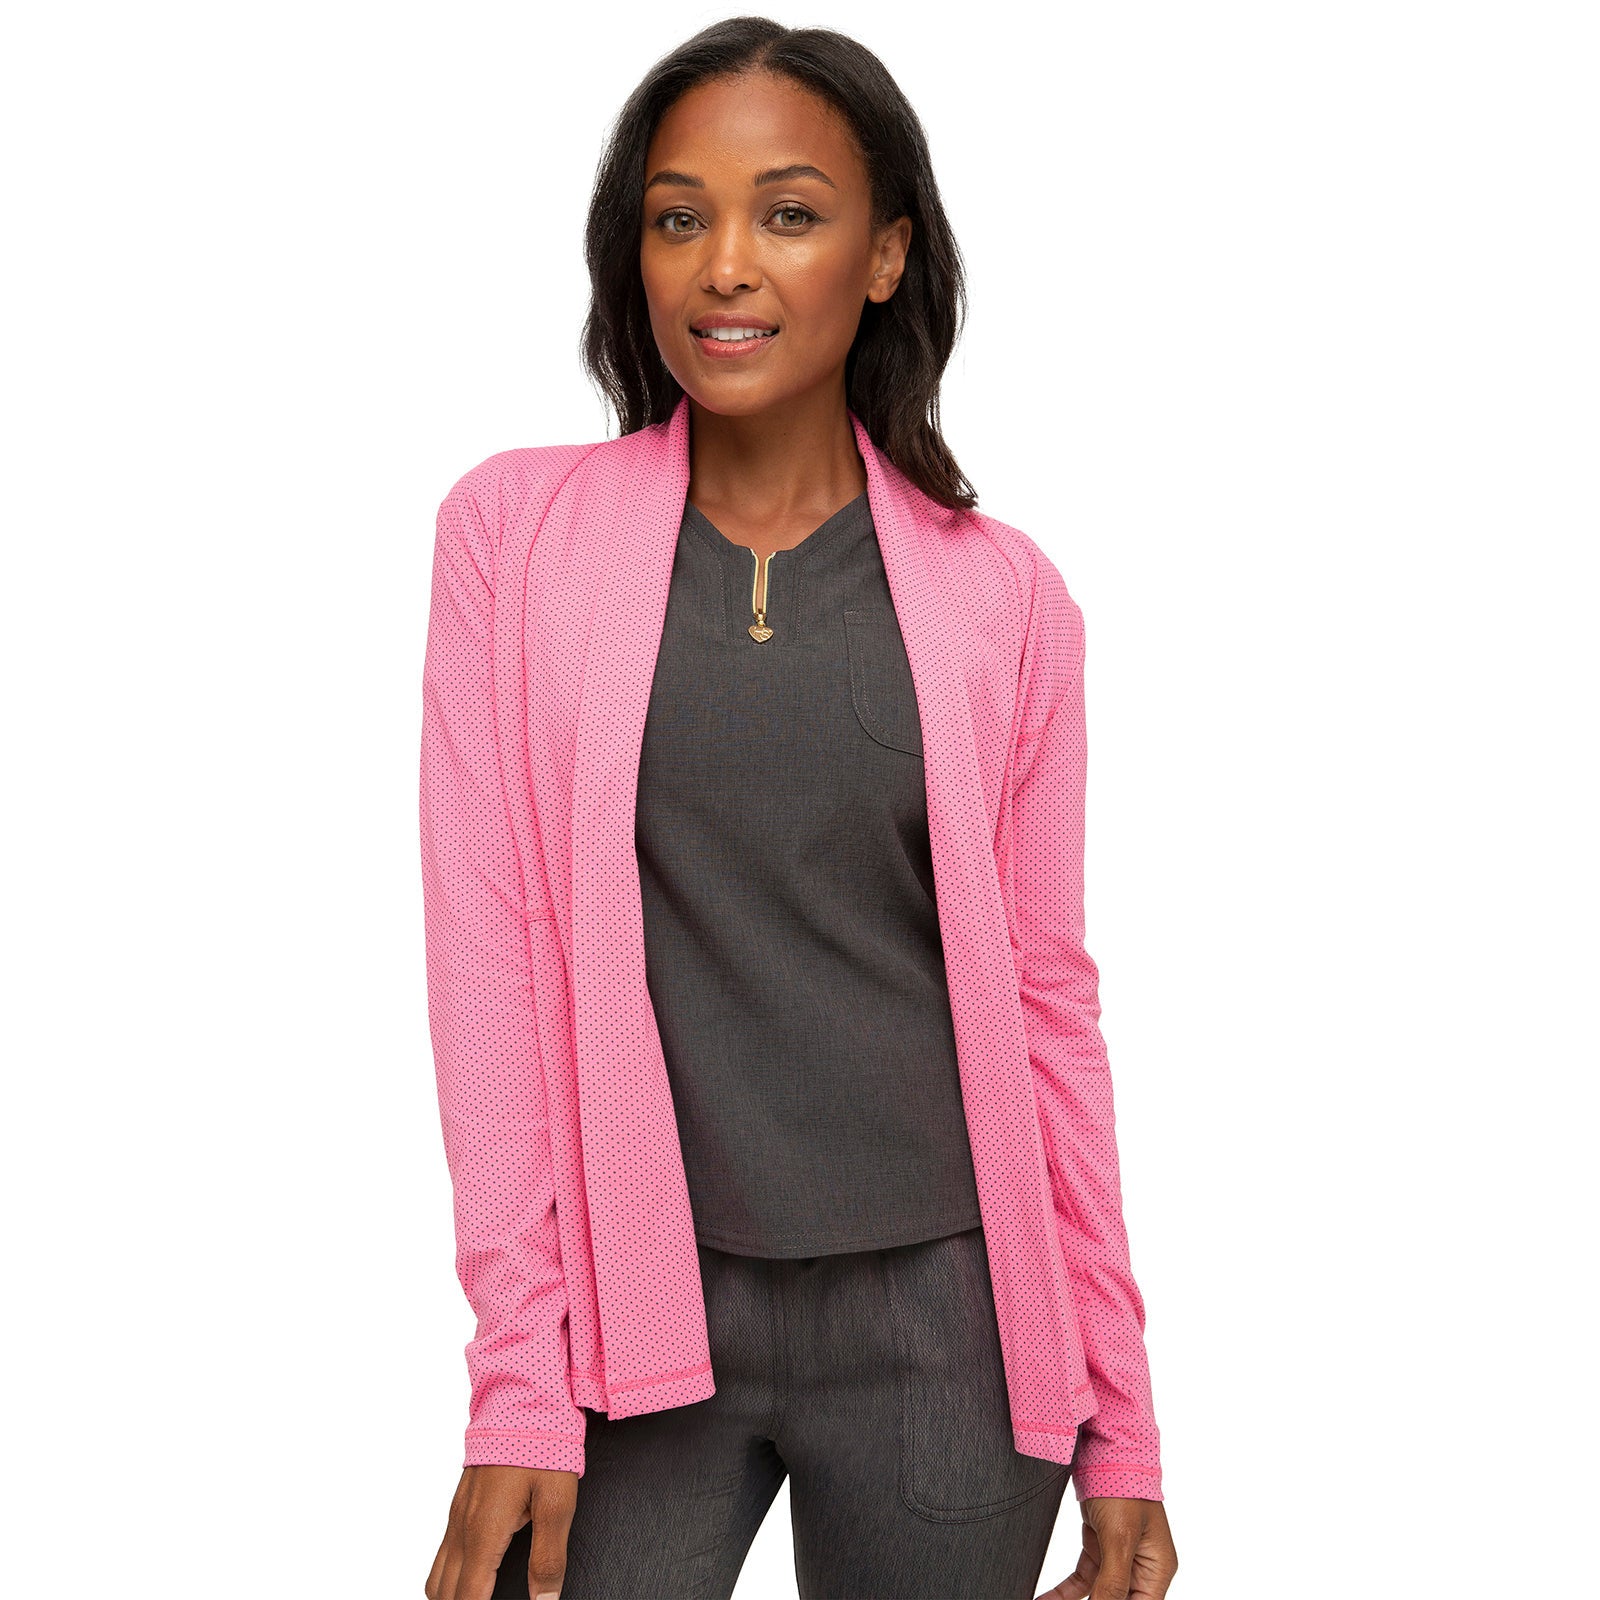 Open Front Peplum Cardigan Jacket in Pink Party Polka Dot HS380 "SALE!"